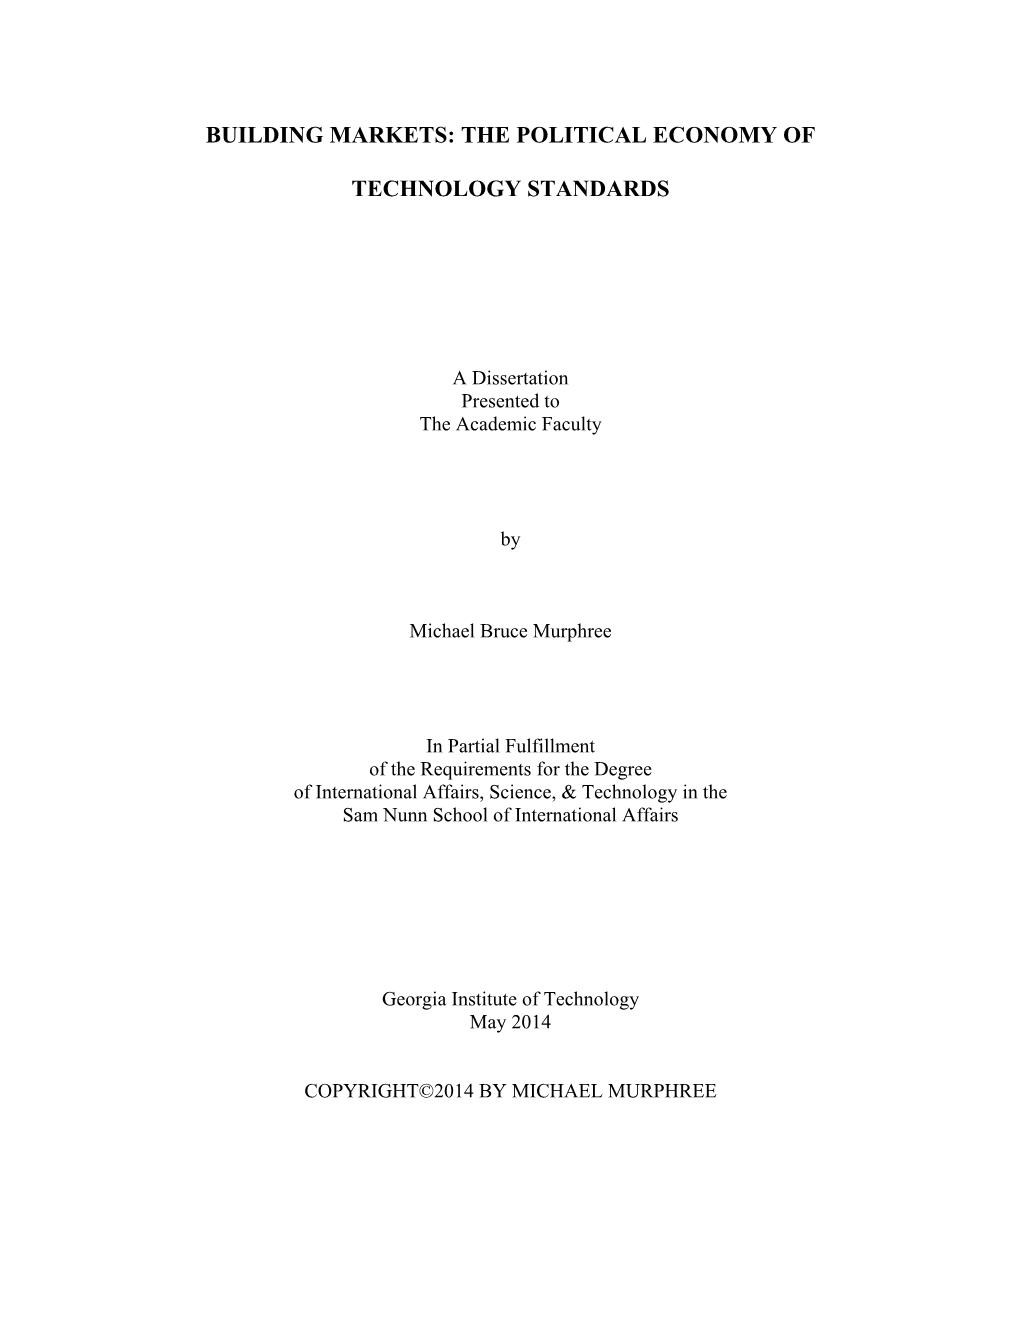 The Political Economy of Technology Standards and the Role They Play in Market Formation